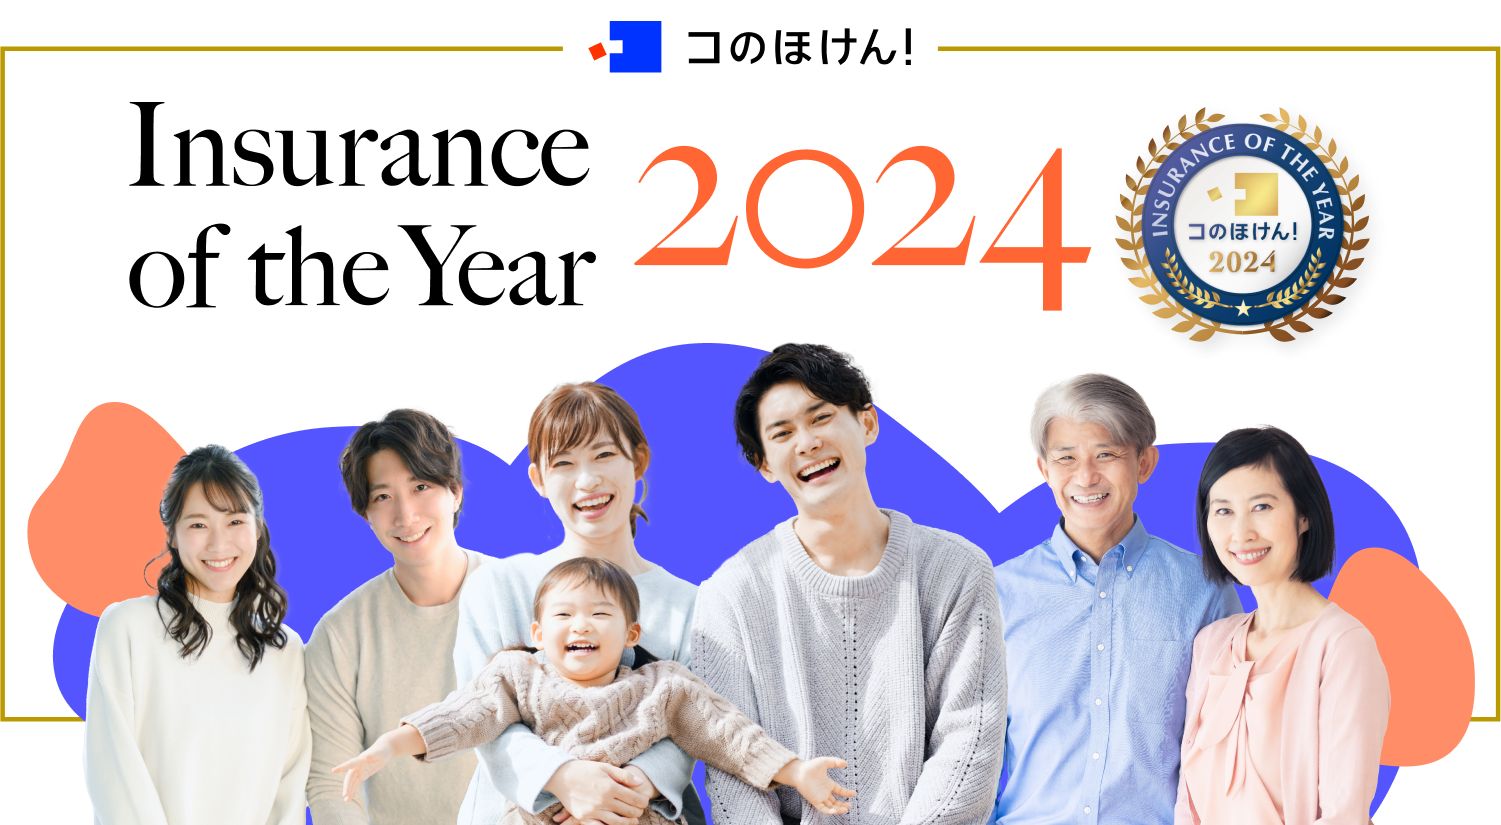 insurance of the year 2023のファーストビュー画像